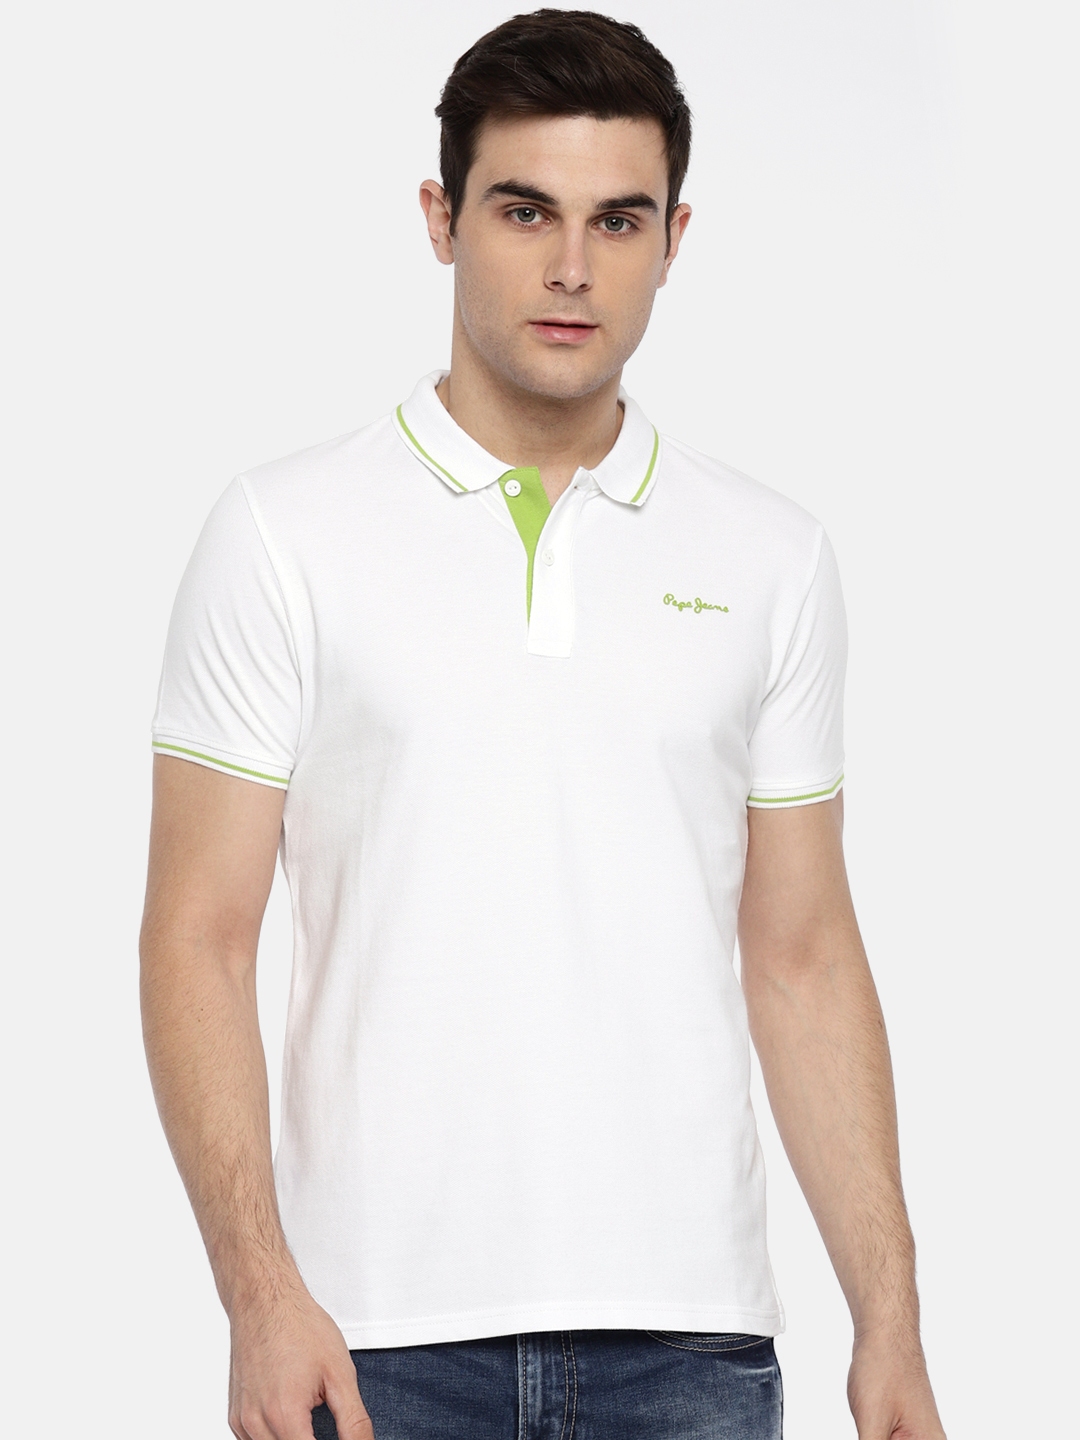 | for Cotton - Tshirts Jeans Pure Pepe Shirt White T Myntra Polo Solid Men Buy 8340965 Men Collar